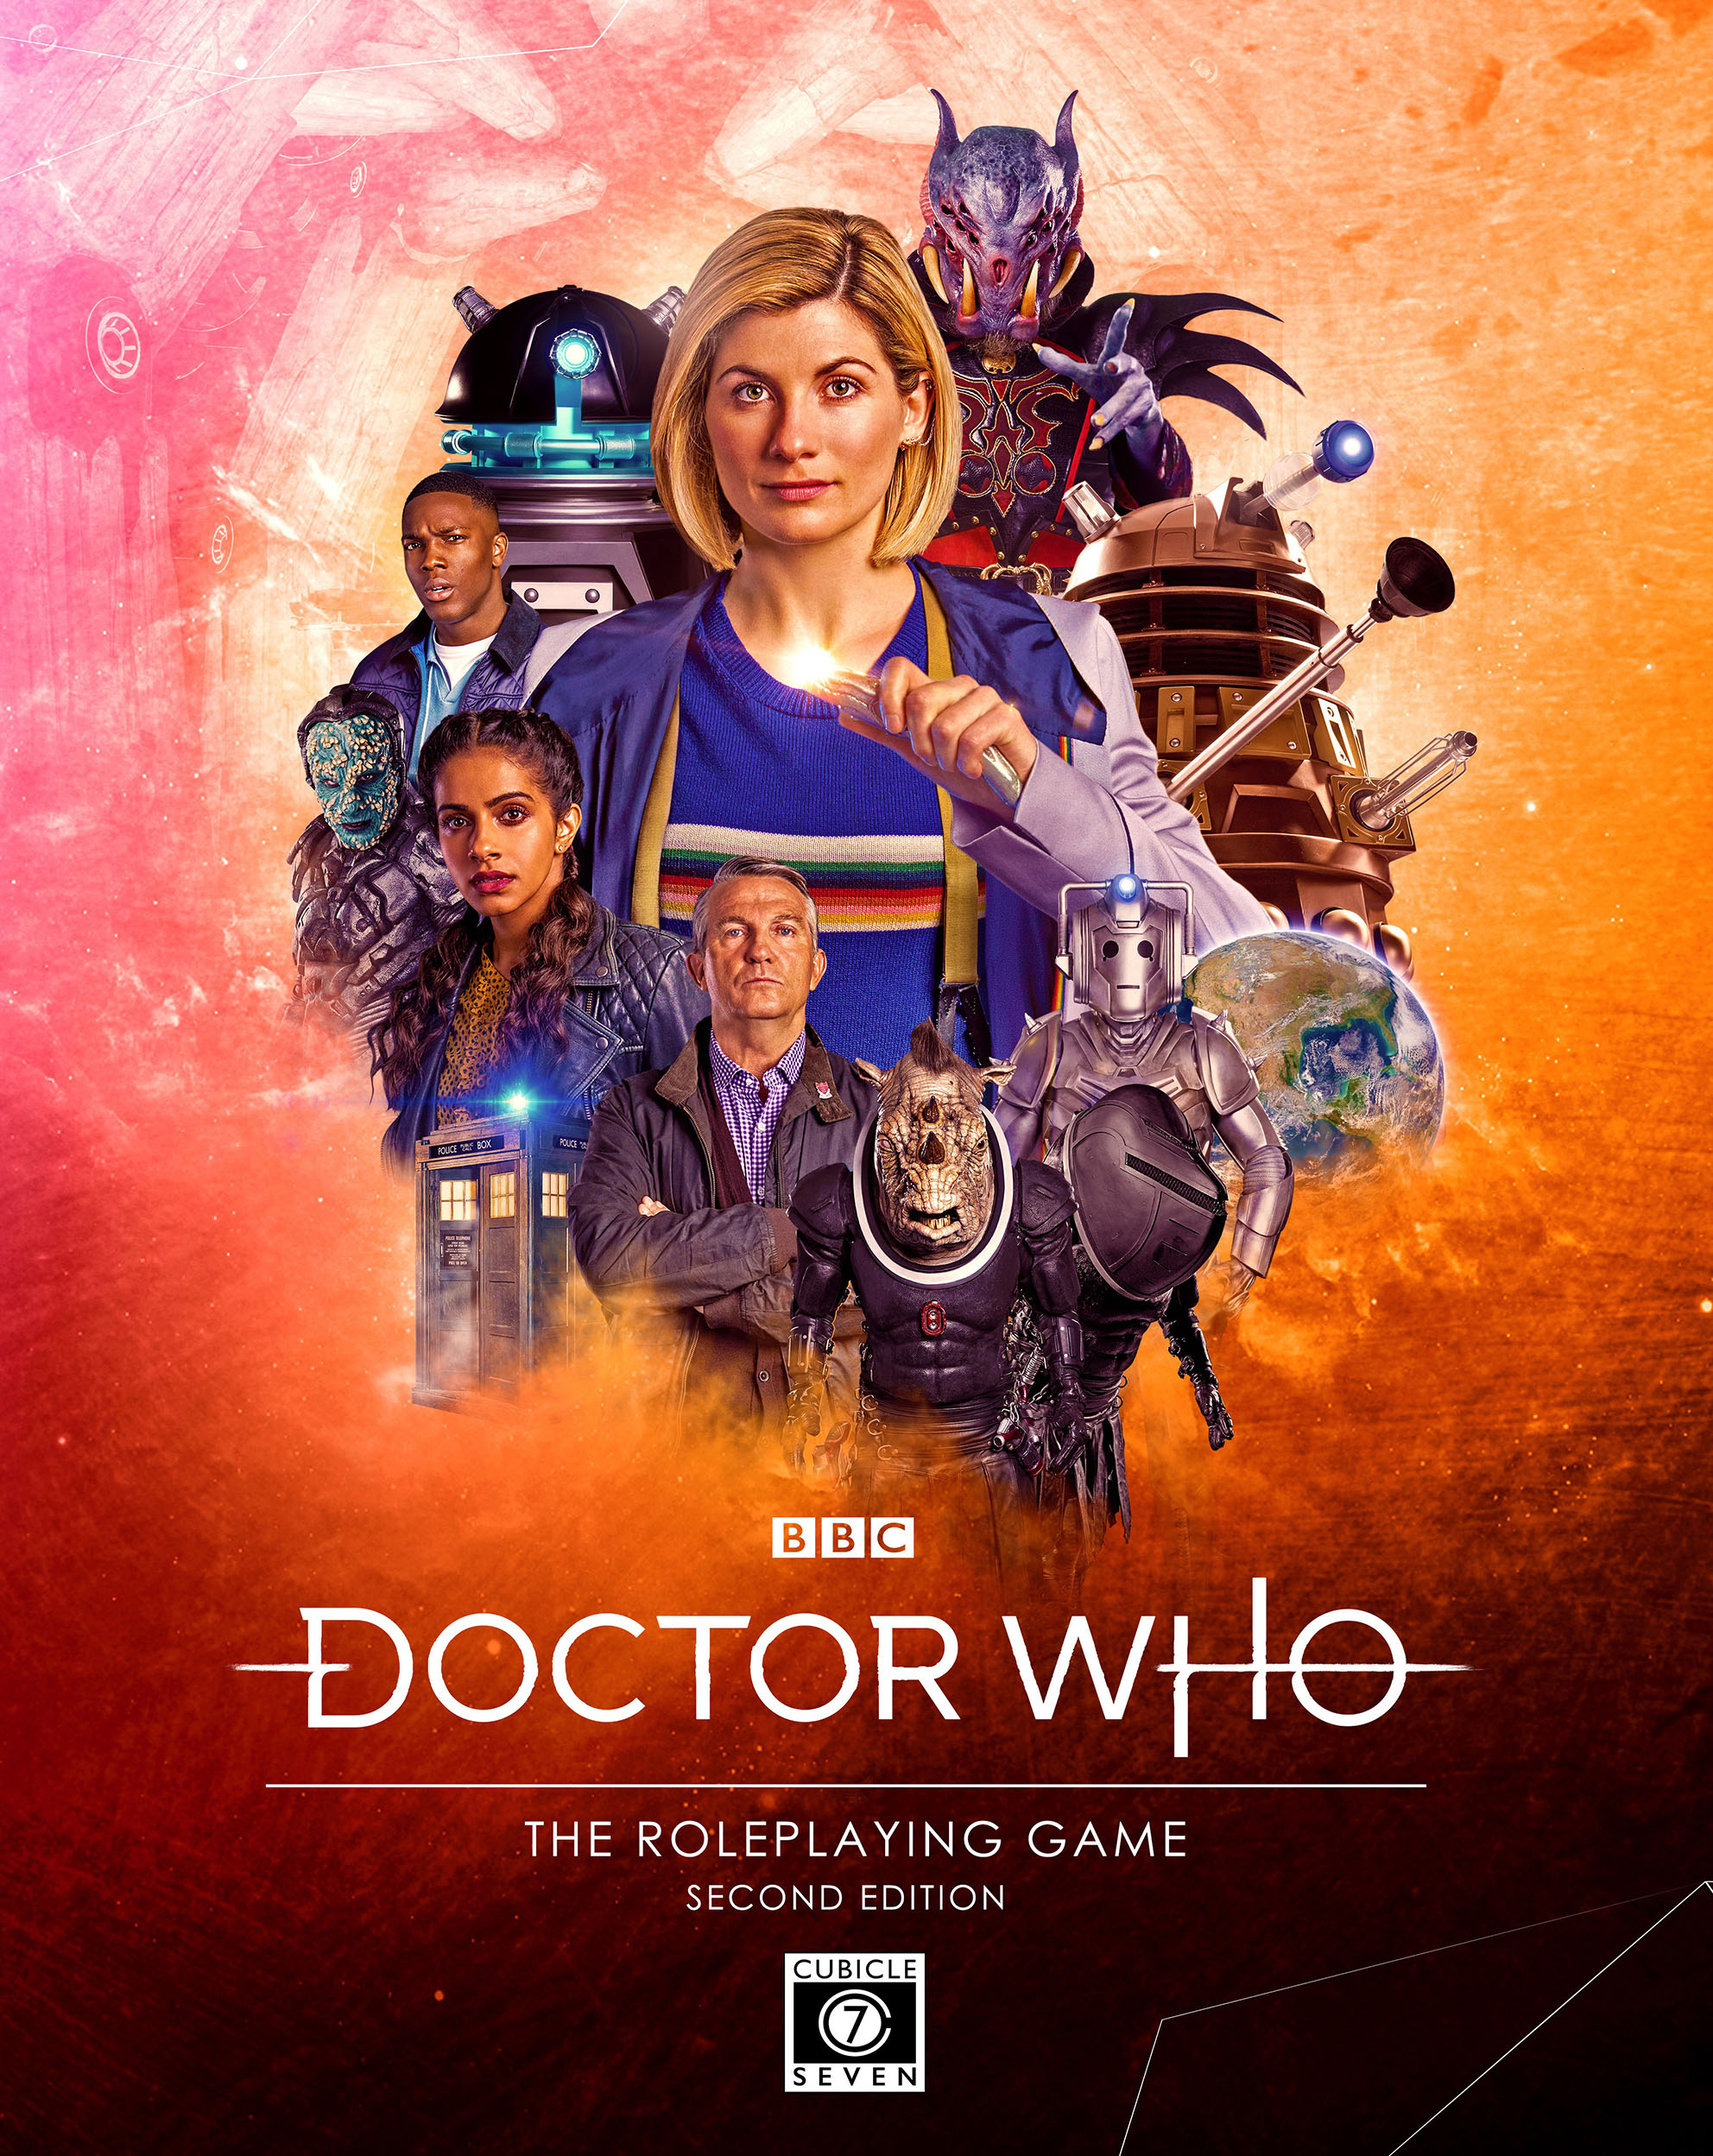 Doctor Who The Roleplaying Game 2nd Edition Cubicle 7